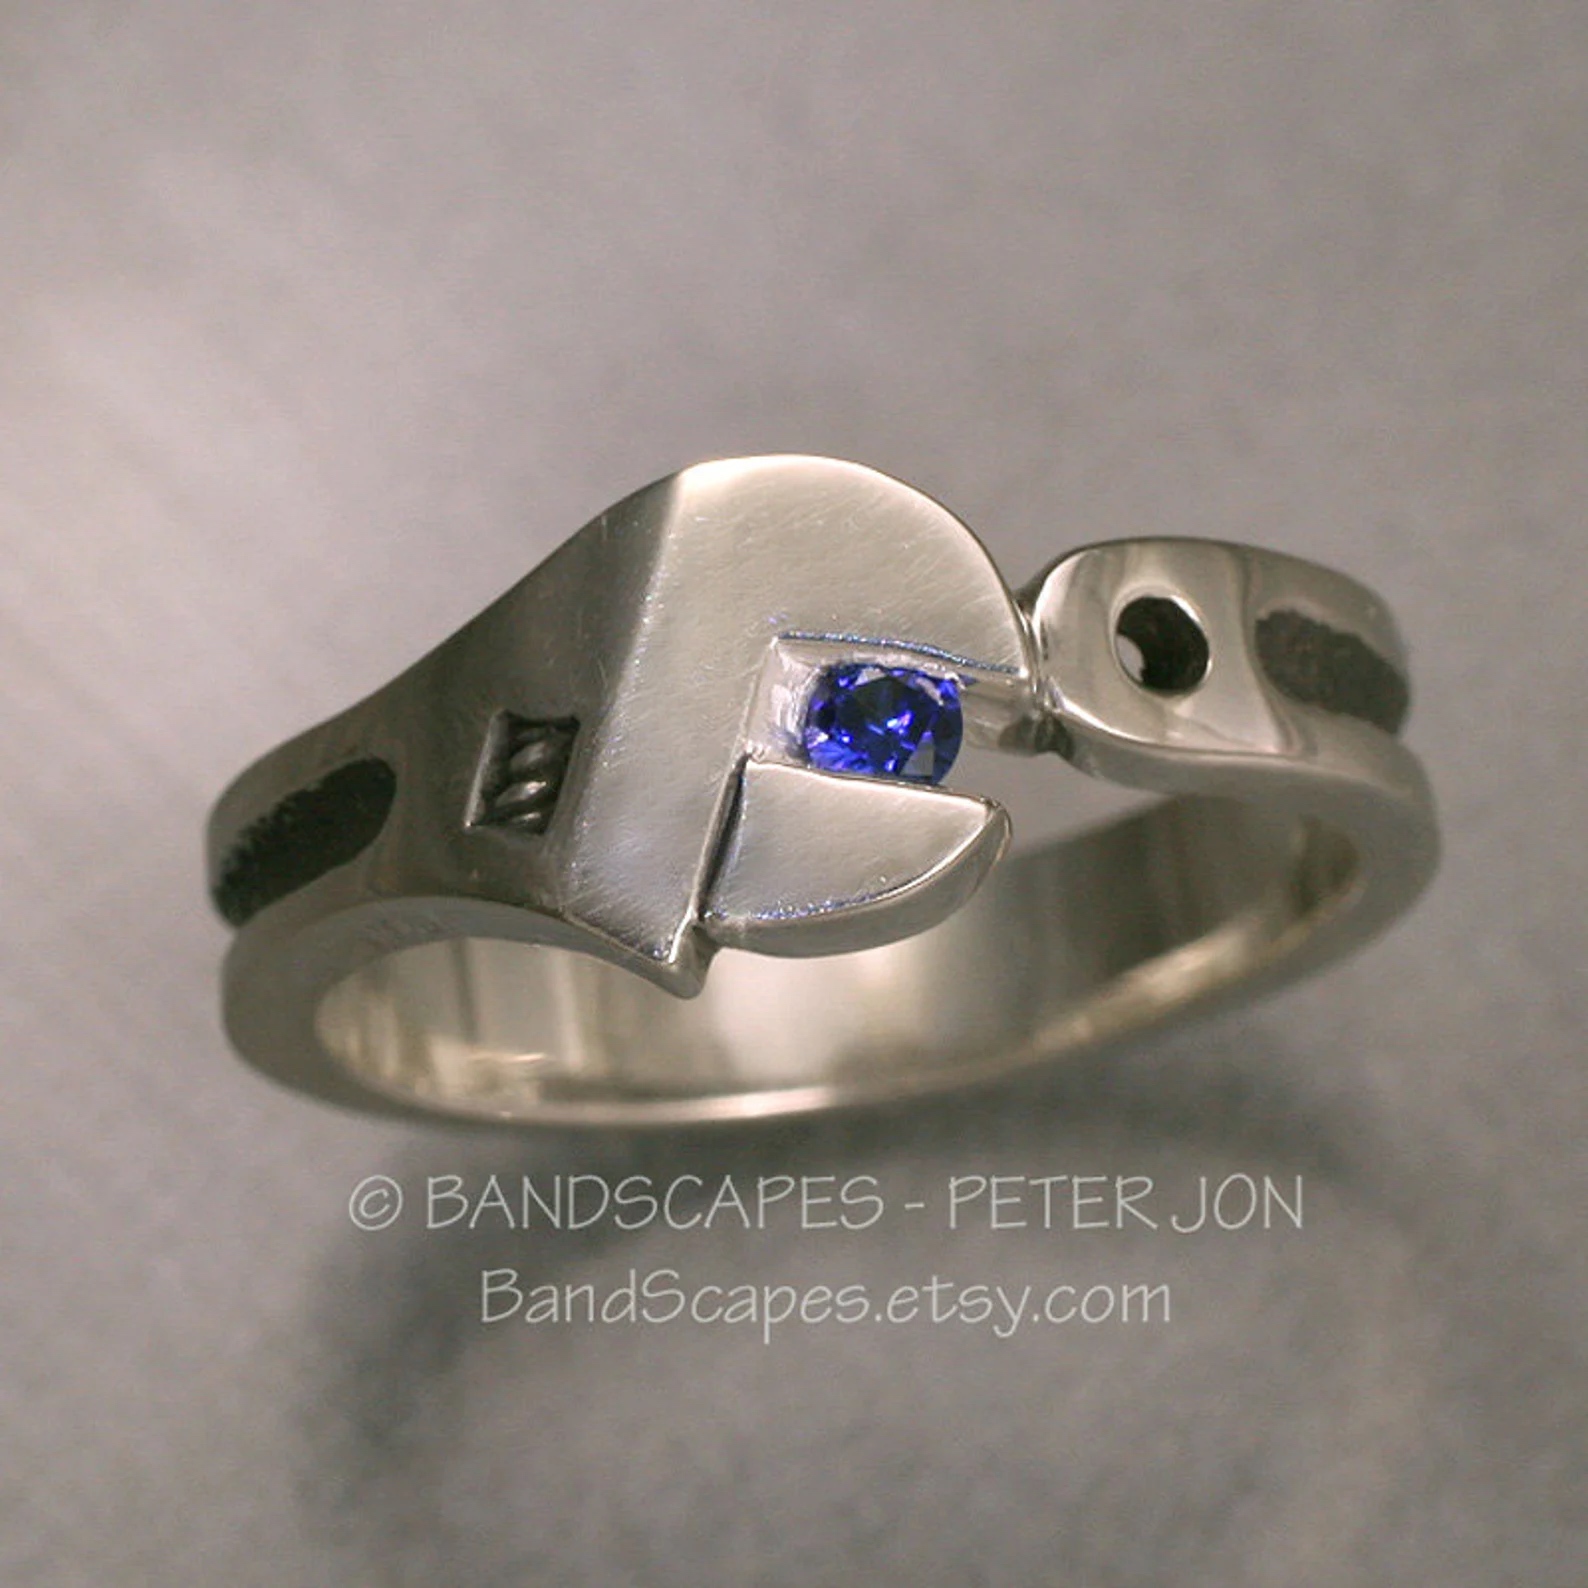 Wrench Shaped Wedding Ring